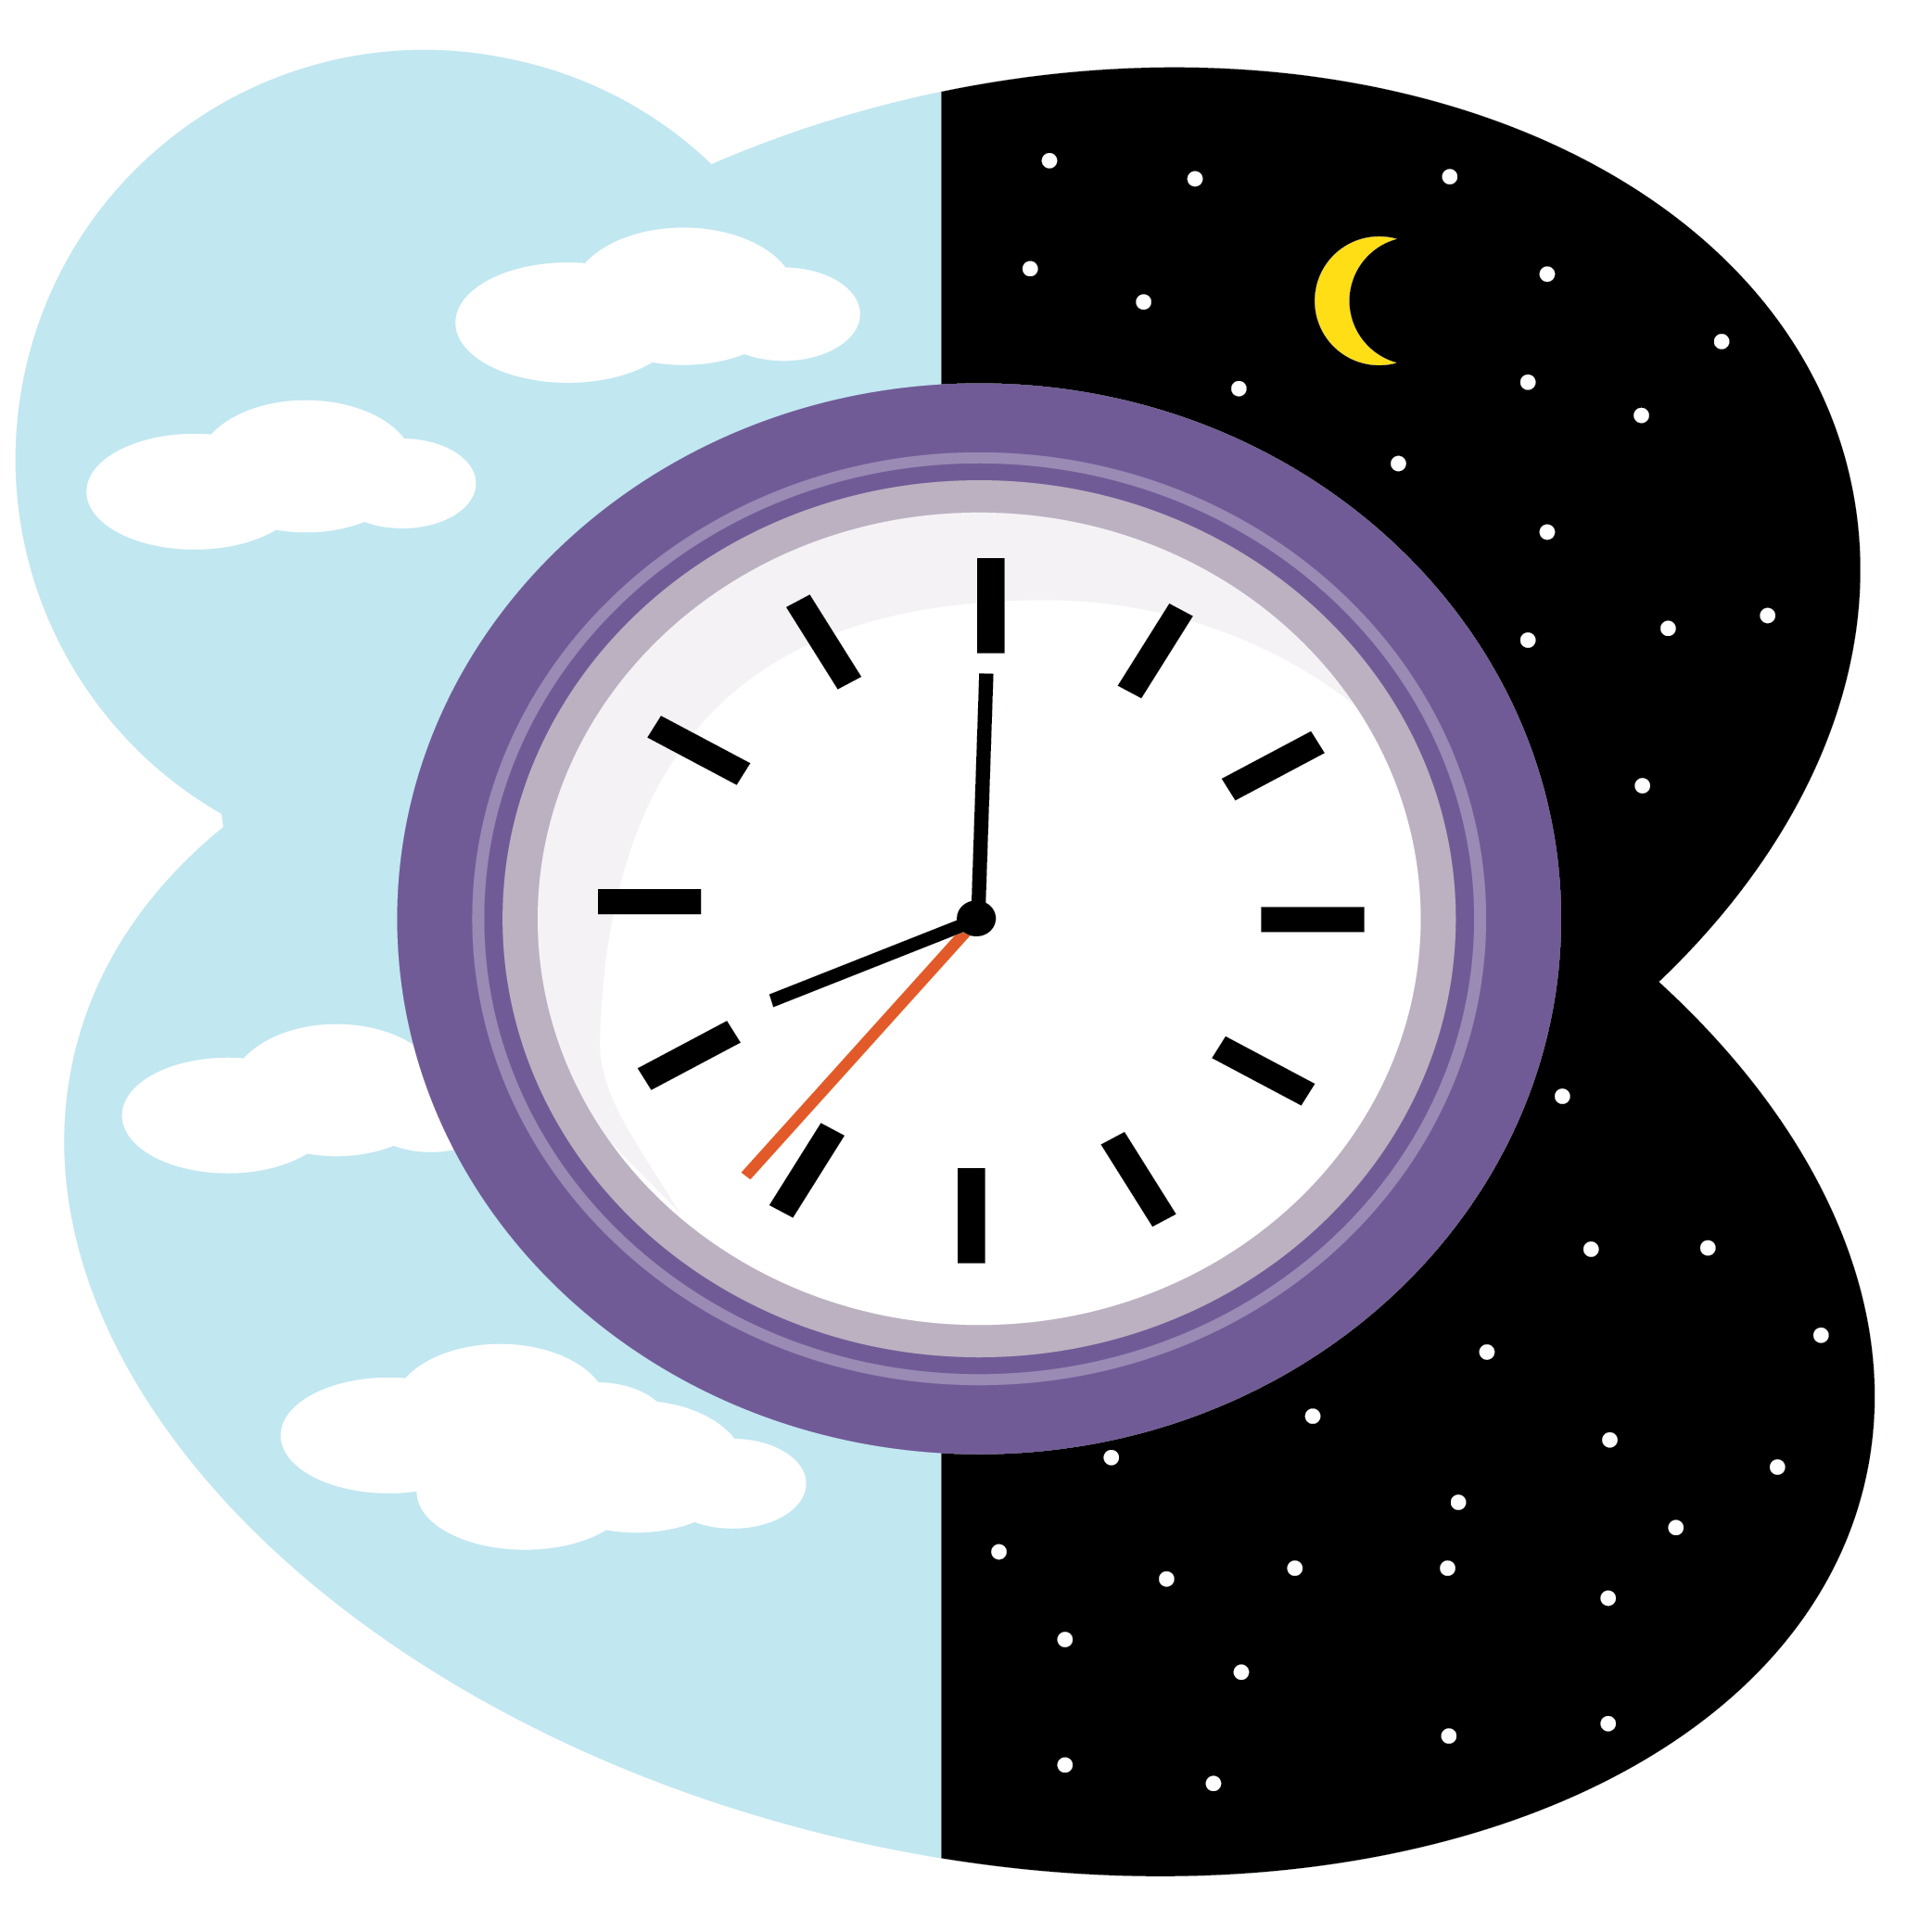 Illustration of a clock in front of a background that is split in half with half showing a blue sky with clouds to indicate daytime and the other half with a dark sky dotted with moon and stars to indicate night